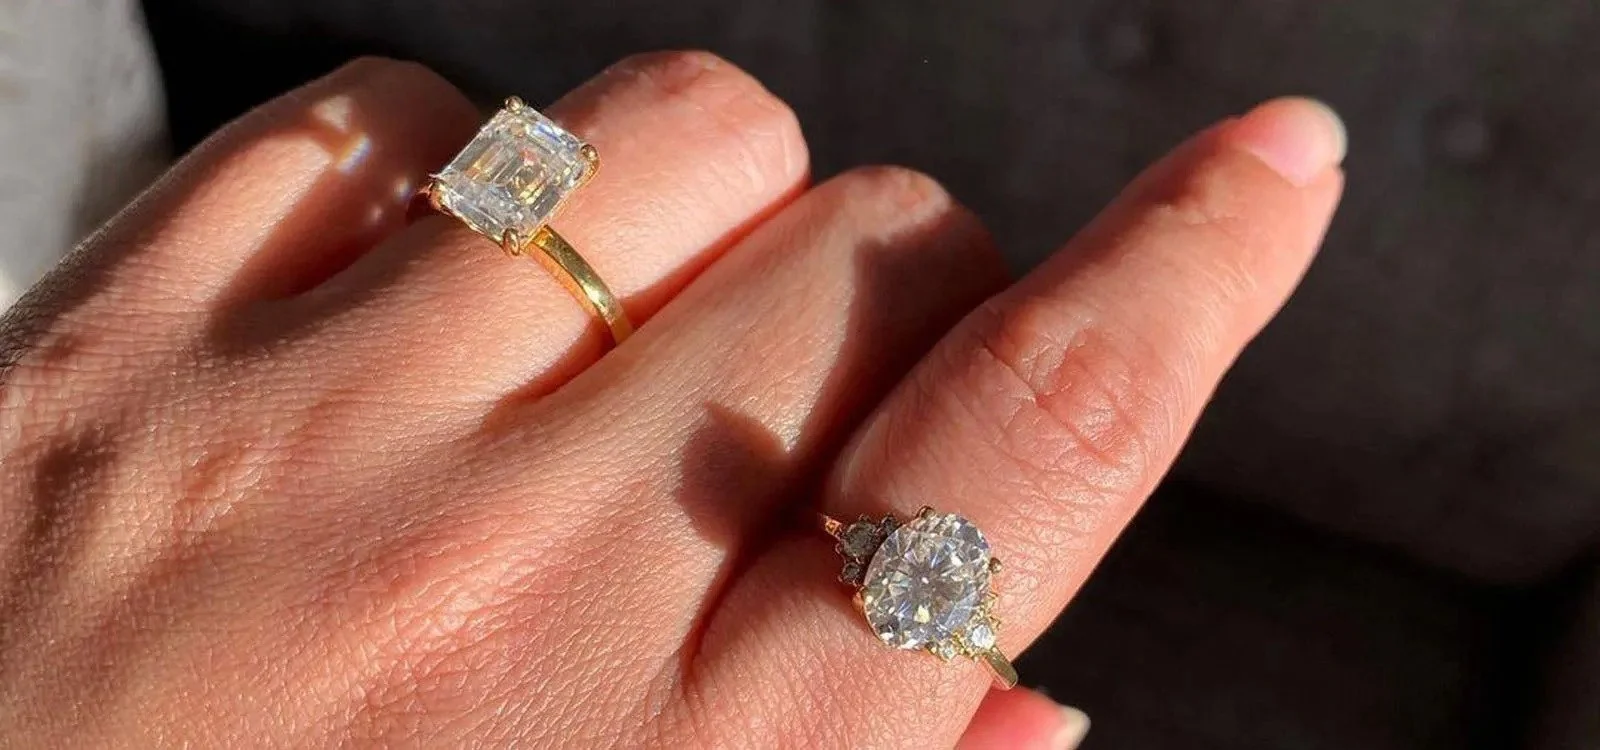 Phoenix woman must pay for canceled eBay sale of 10-carat diamond ring